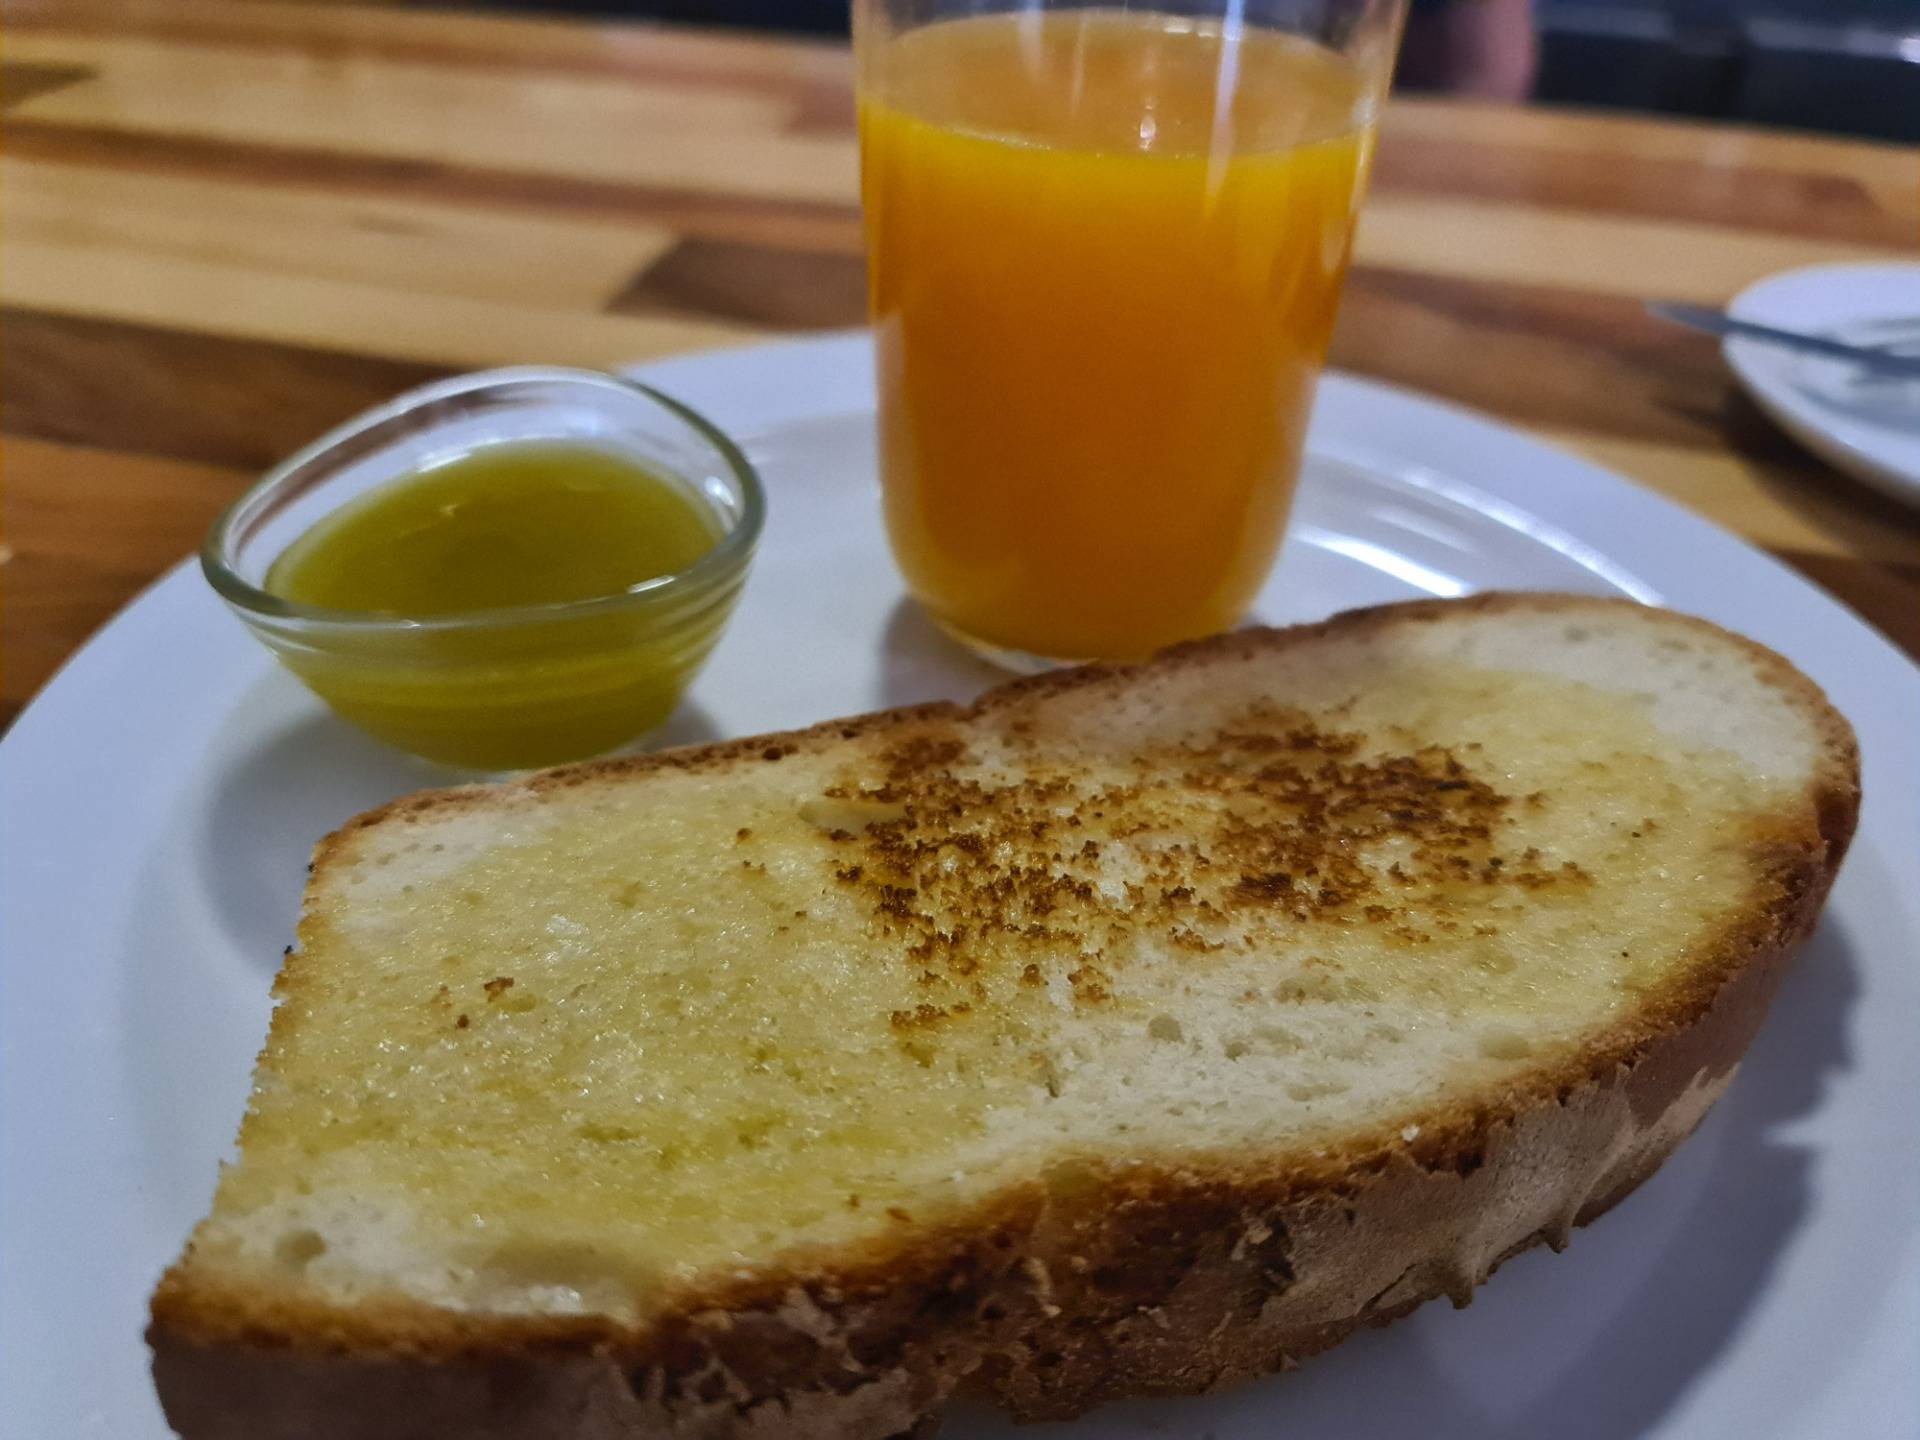 Toast with artisan village bread, artisan butter, homemade plum jam and freshly squeezed orange juice.